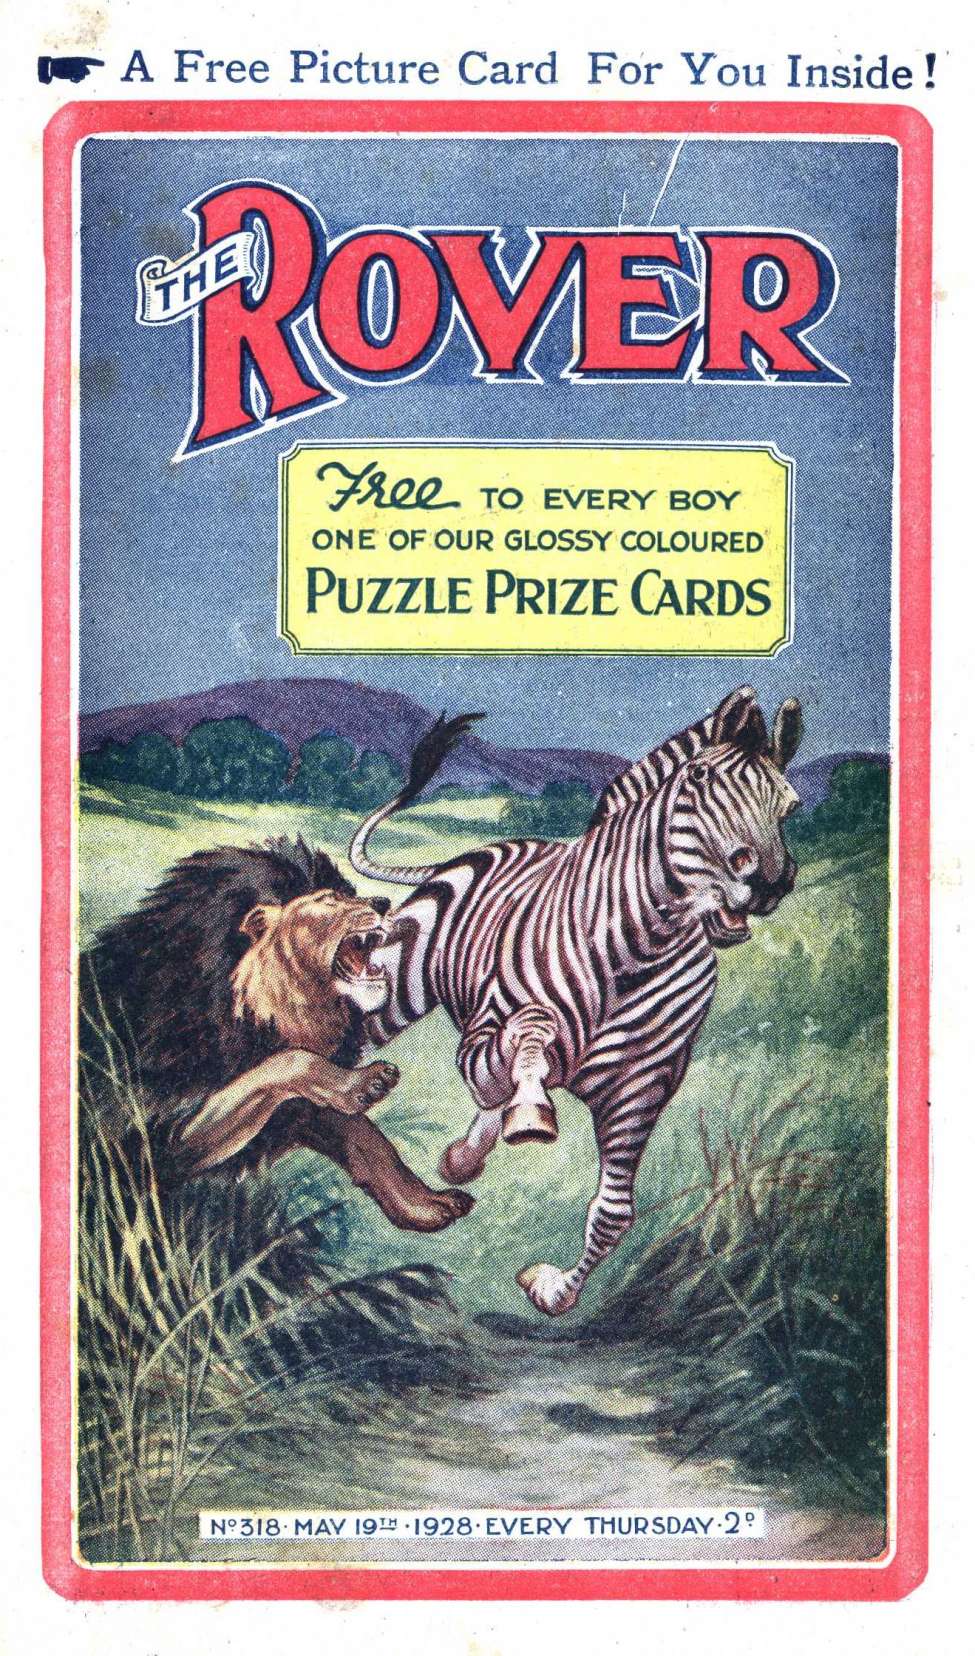 Book Cover For The Rover 318